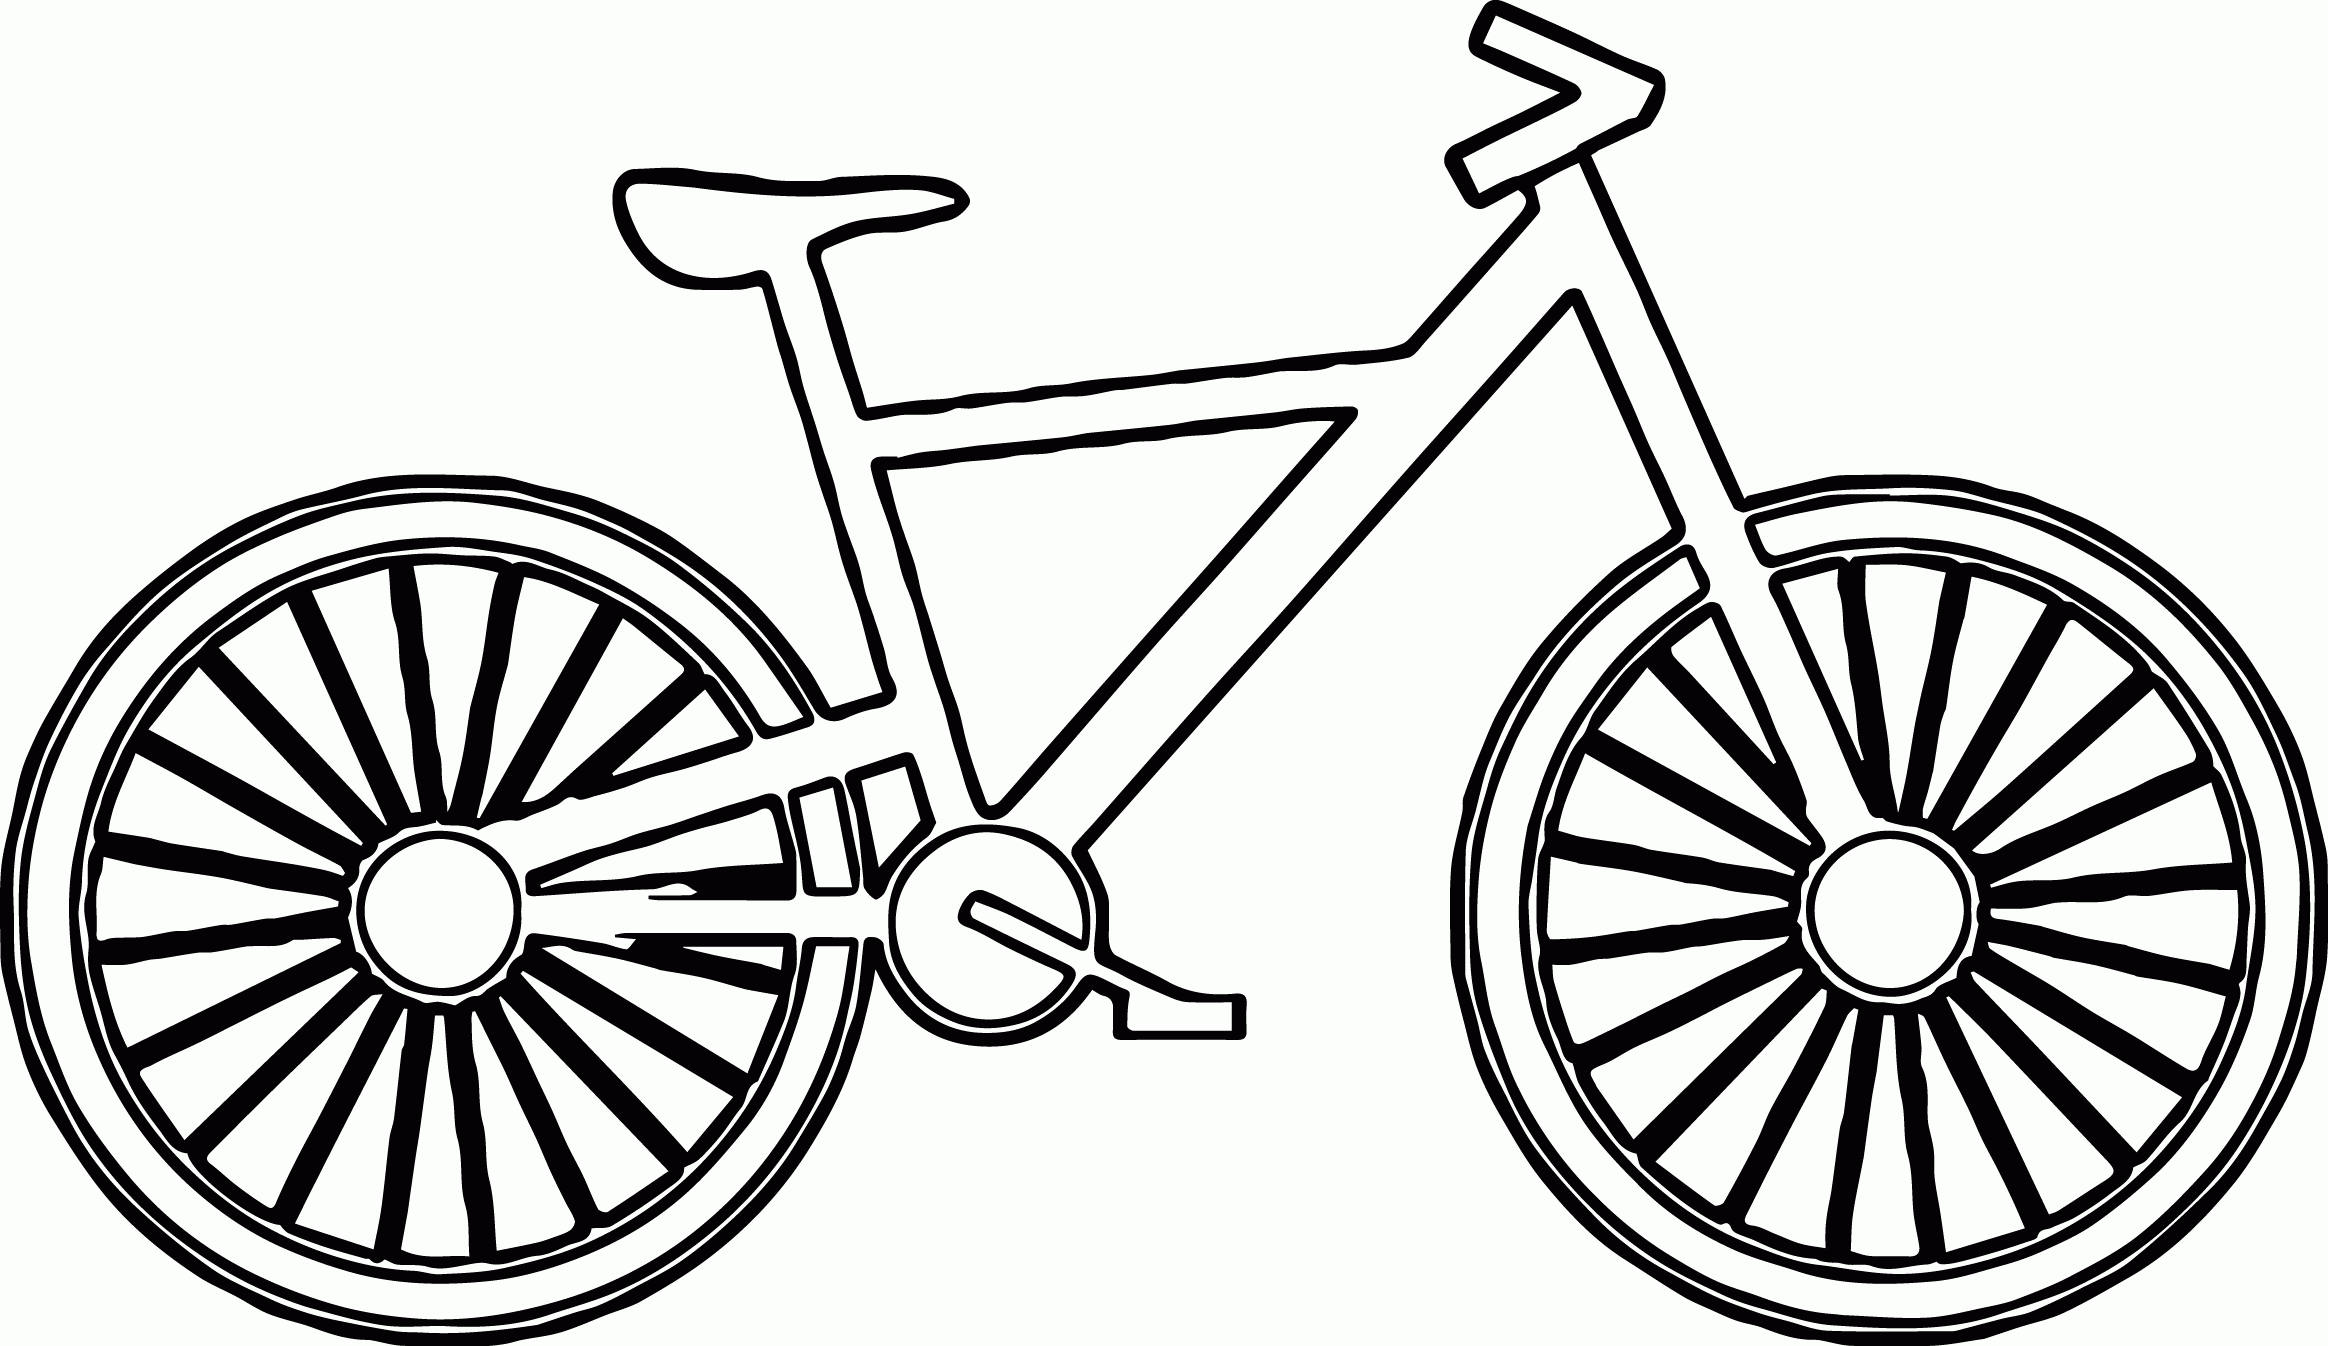 Cartoon Bicycle 1 Coloring Page | Wecoloringpage